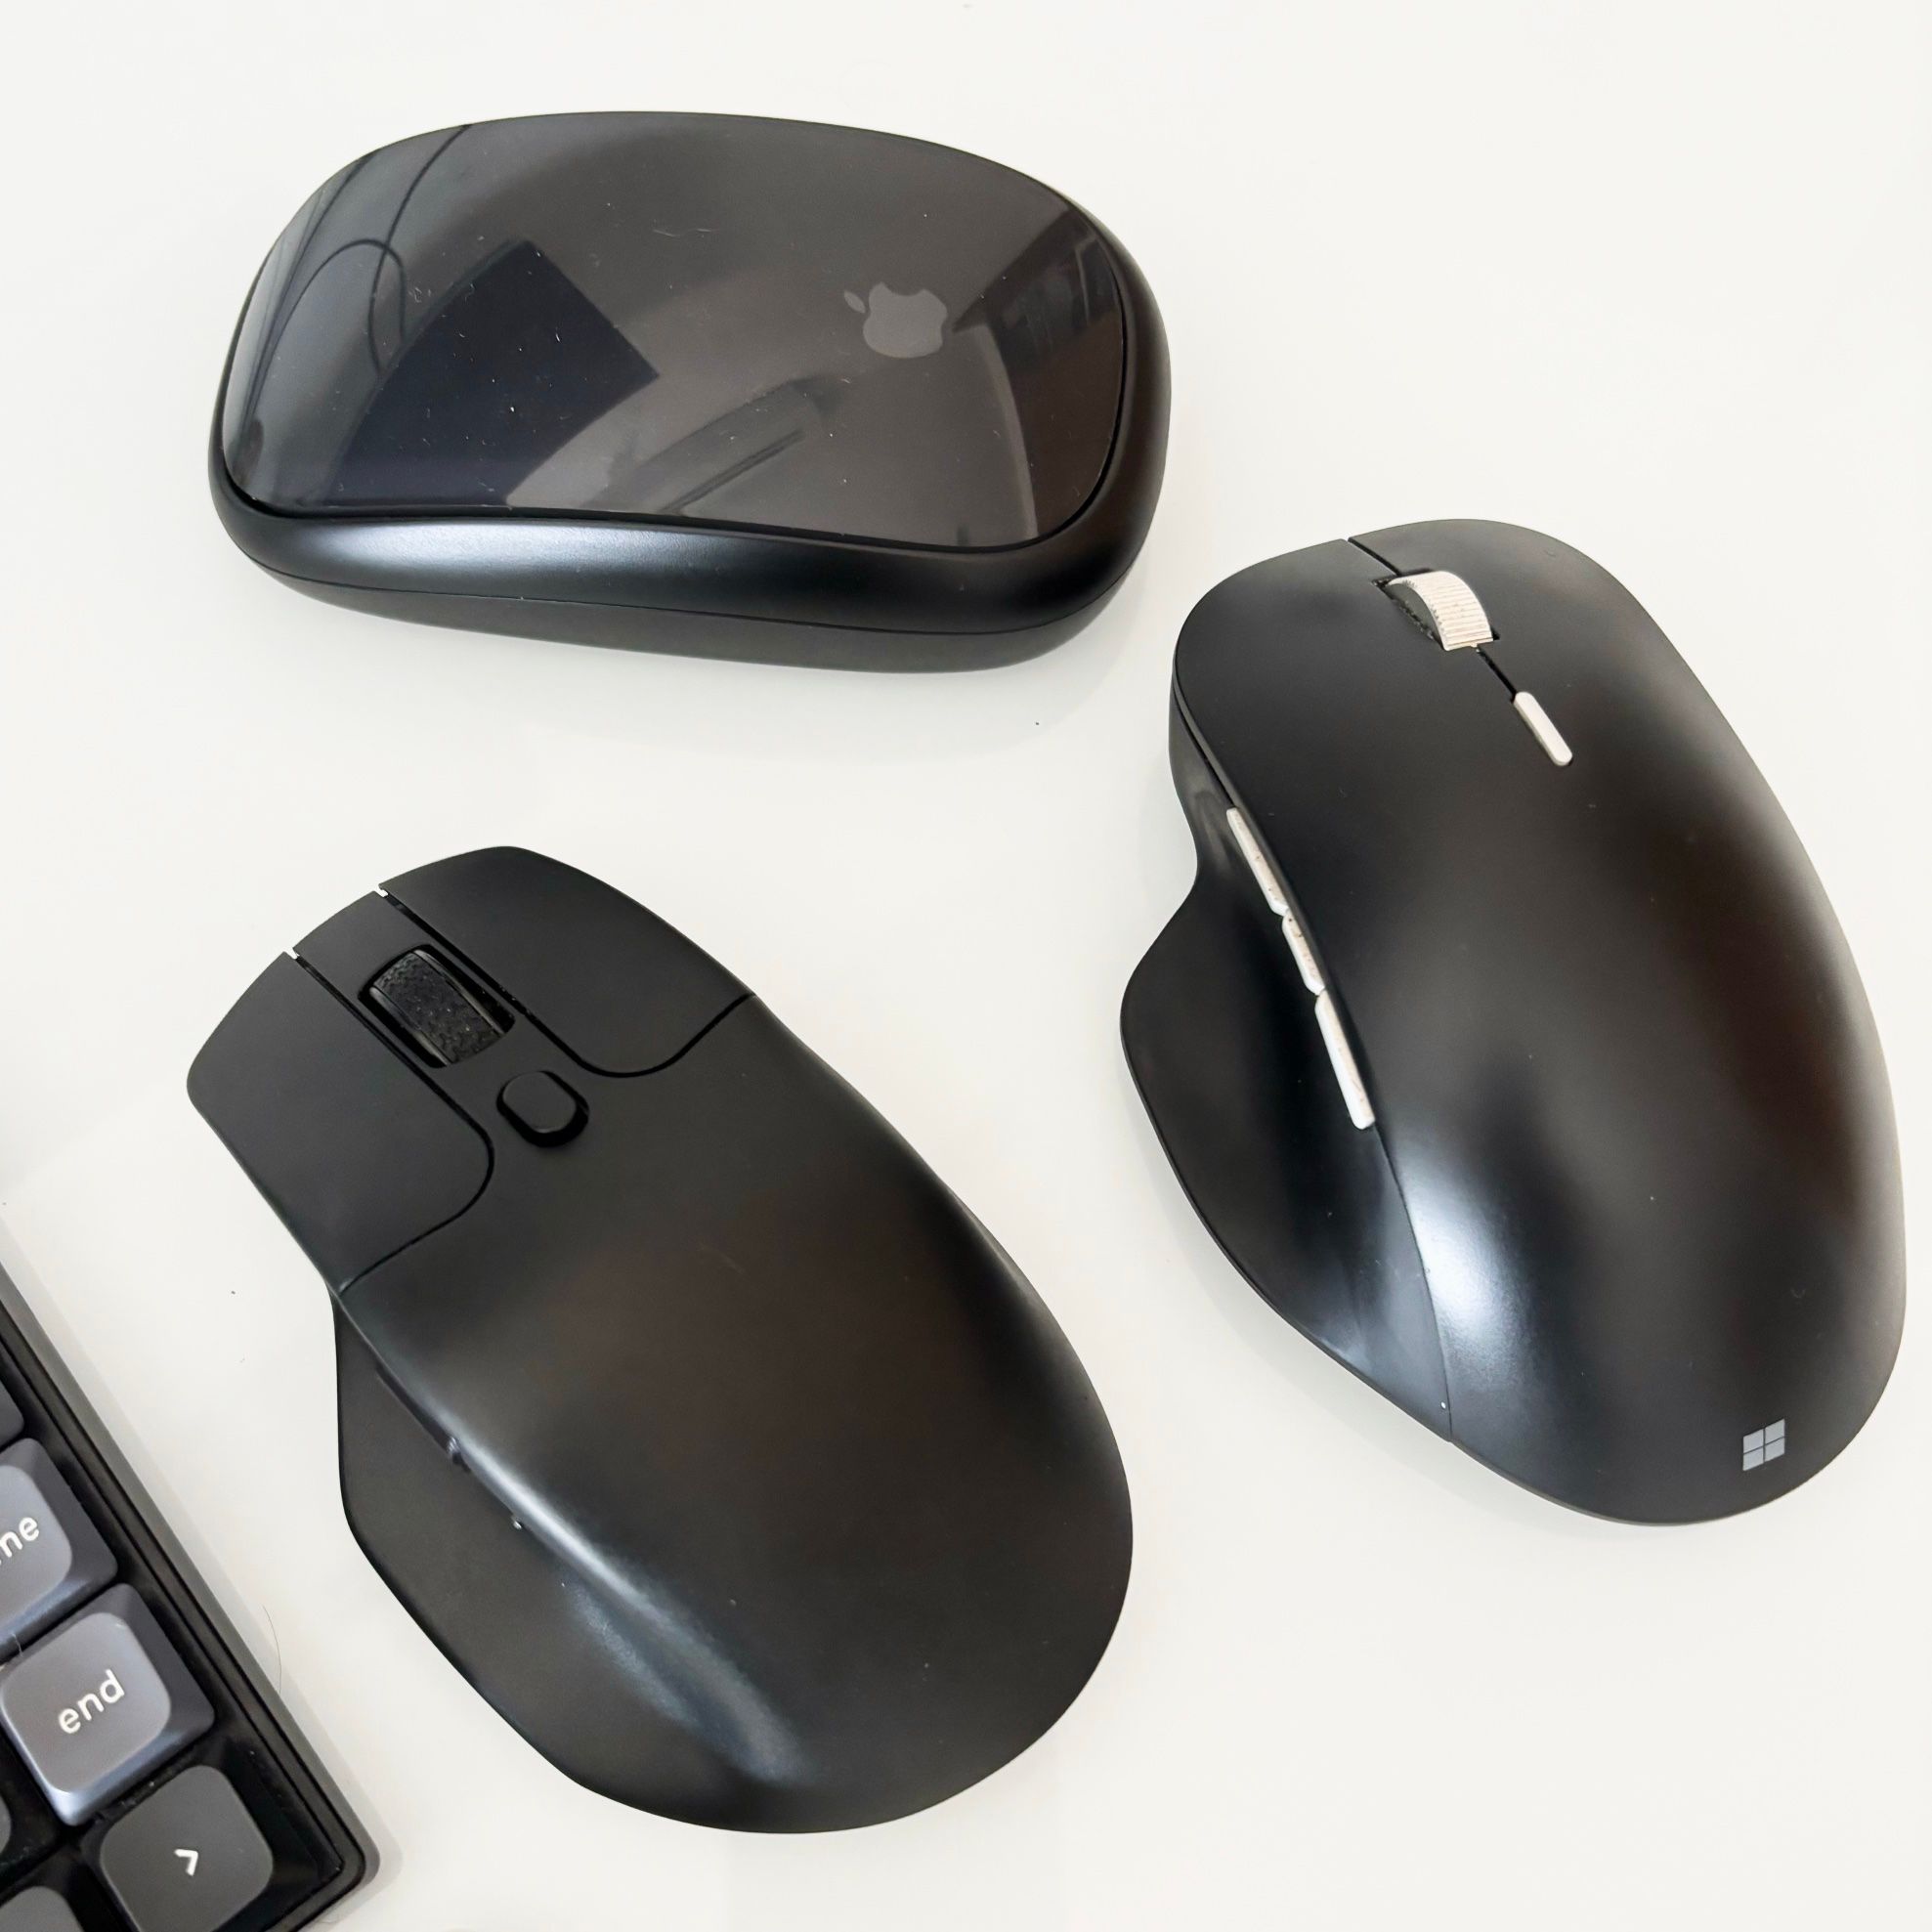 Keychron M6, Magic Mouse and MS Surface Precision